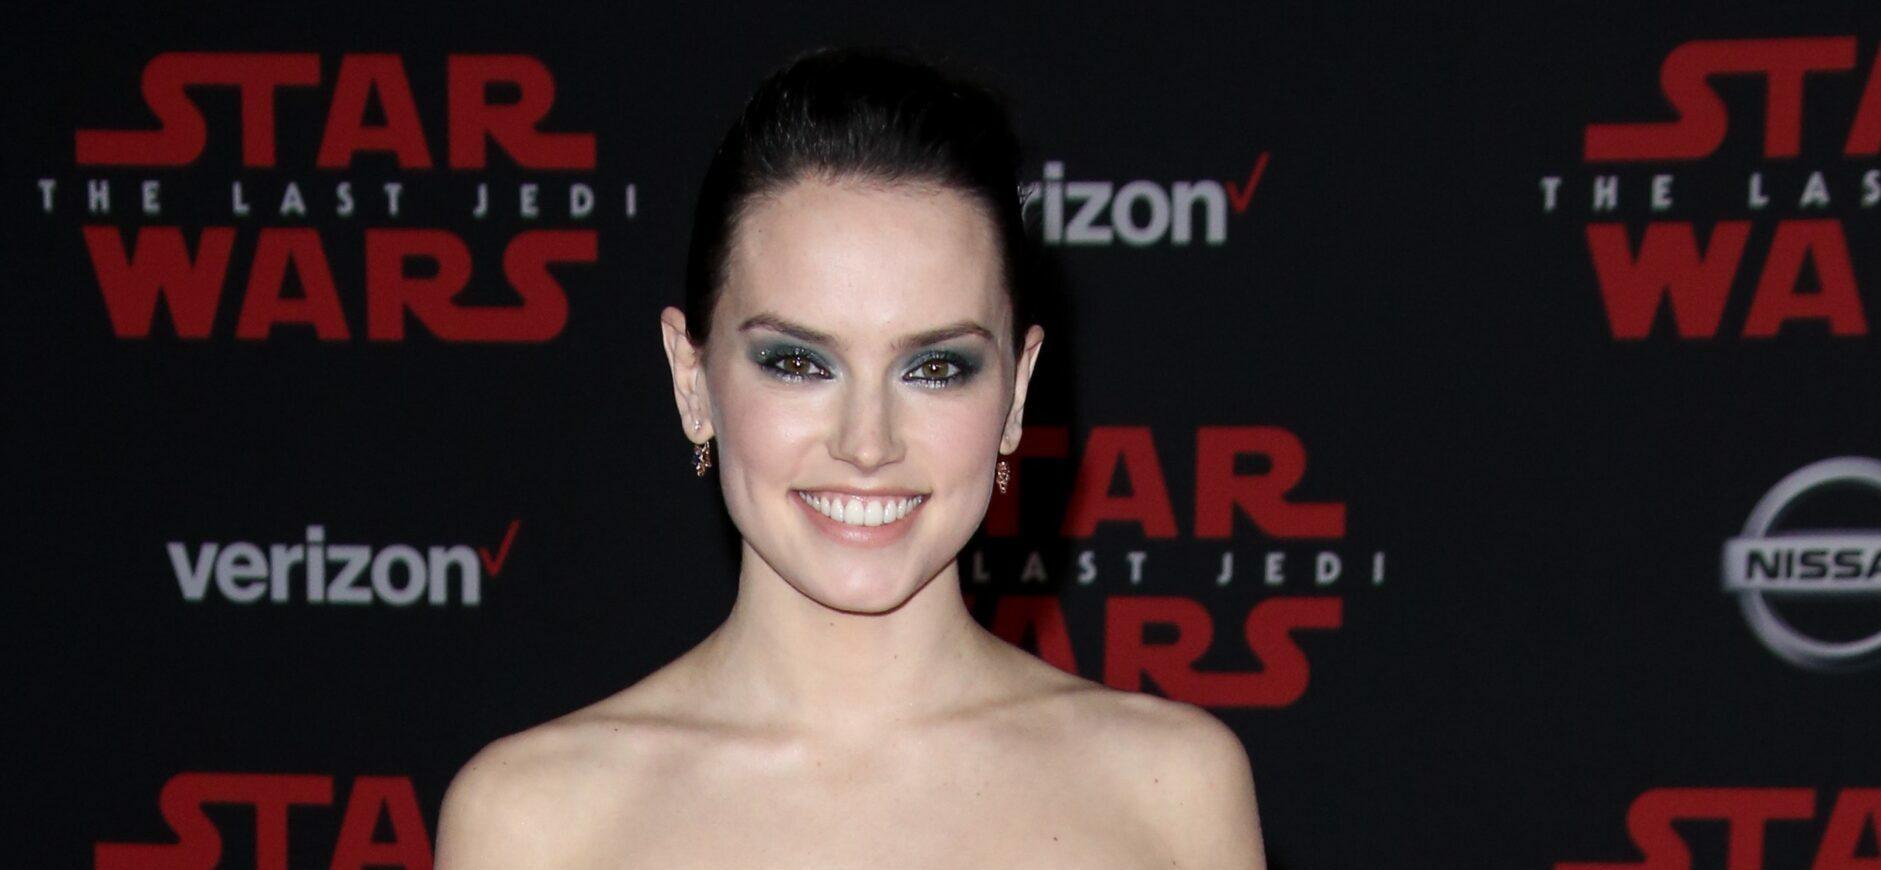 Daisy Ridley arrives for the red carpet premiere of Disney Pictures 'Star Wars: The Last Jedi' at The Shrine Auditorium in Los Angeles, California.